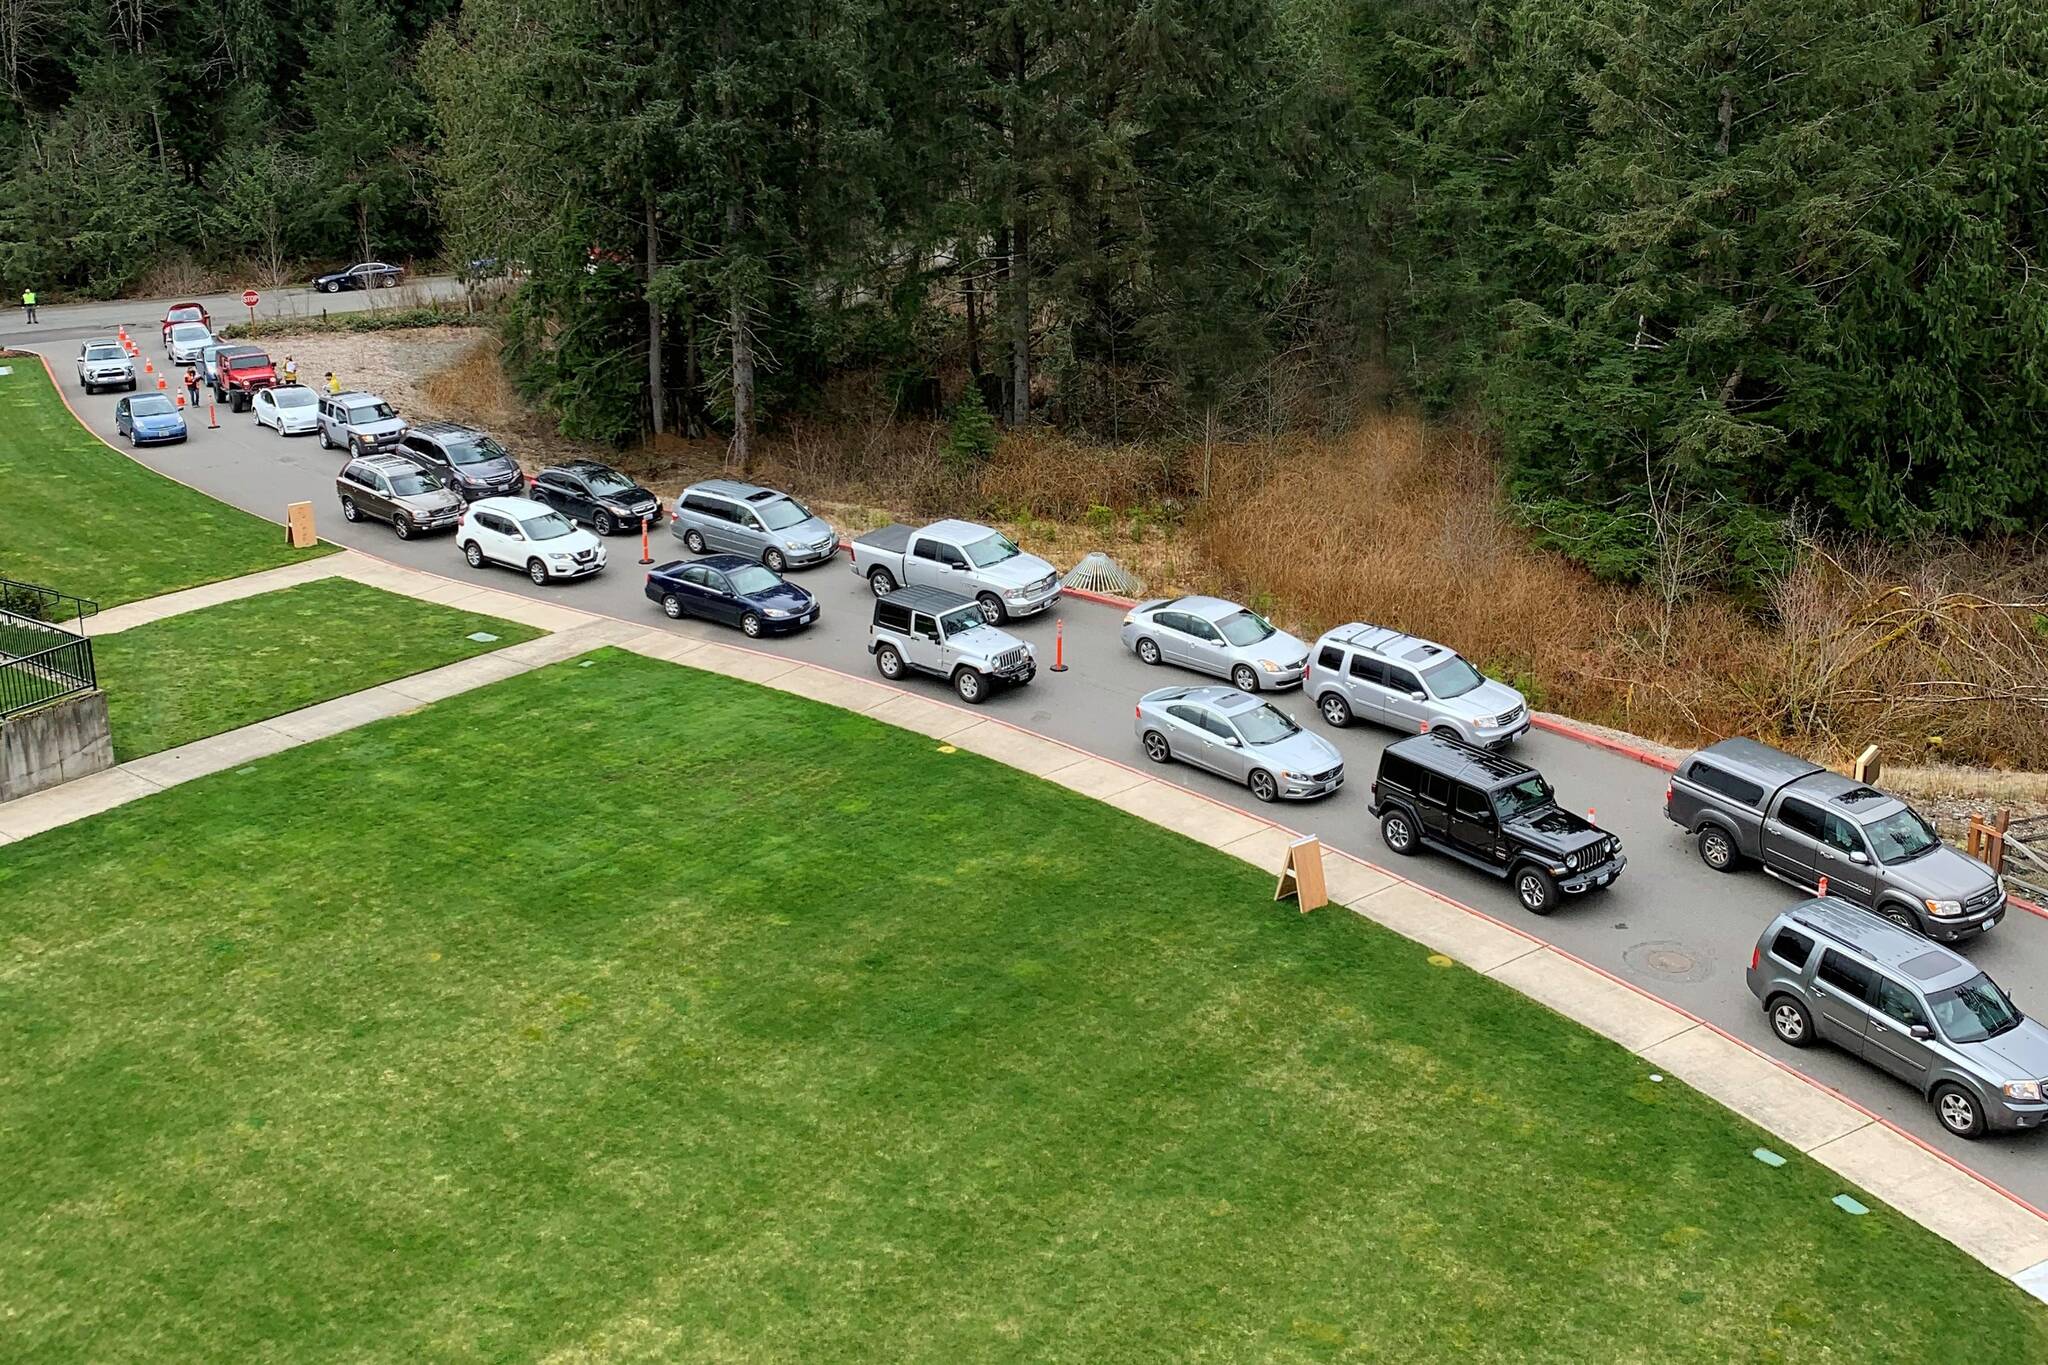 Cars lined up at Snoqualmie Valley Hospital on March 26, 2021, as people awaited their first dose of the Moderna COVID-19 vaccine as part of the hospital’s first mass vaccination event. File Photo contributed by Snoqualmie Valley Hospital.